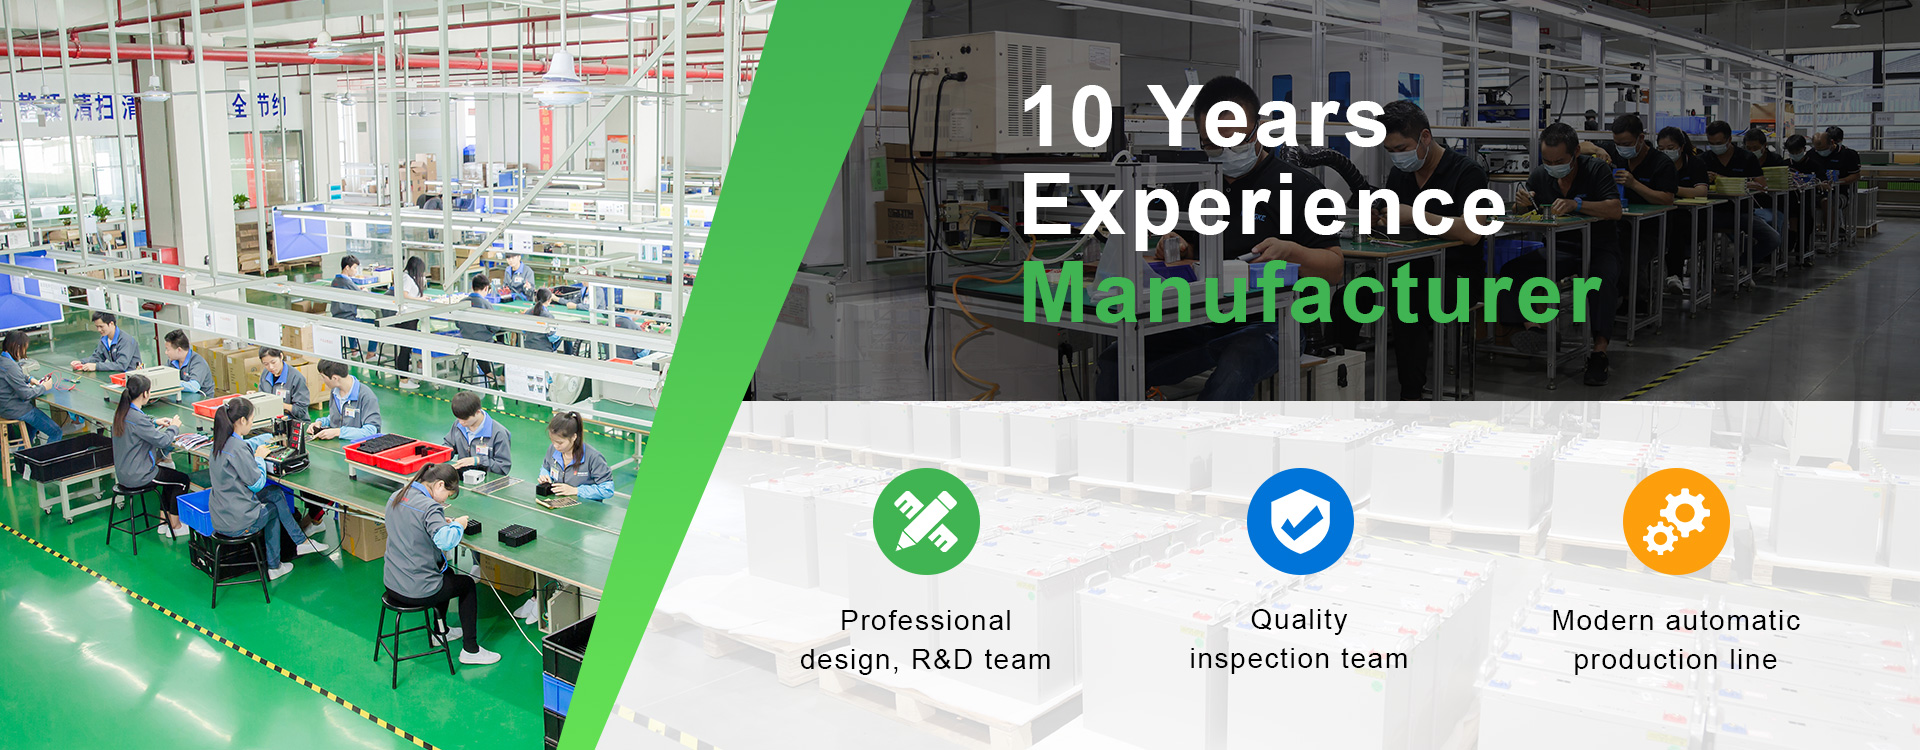 10 Years Experience Manufacturer